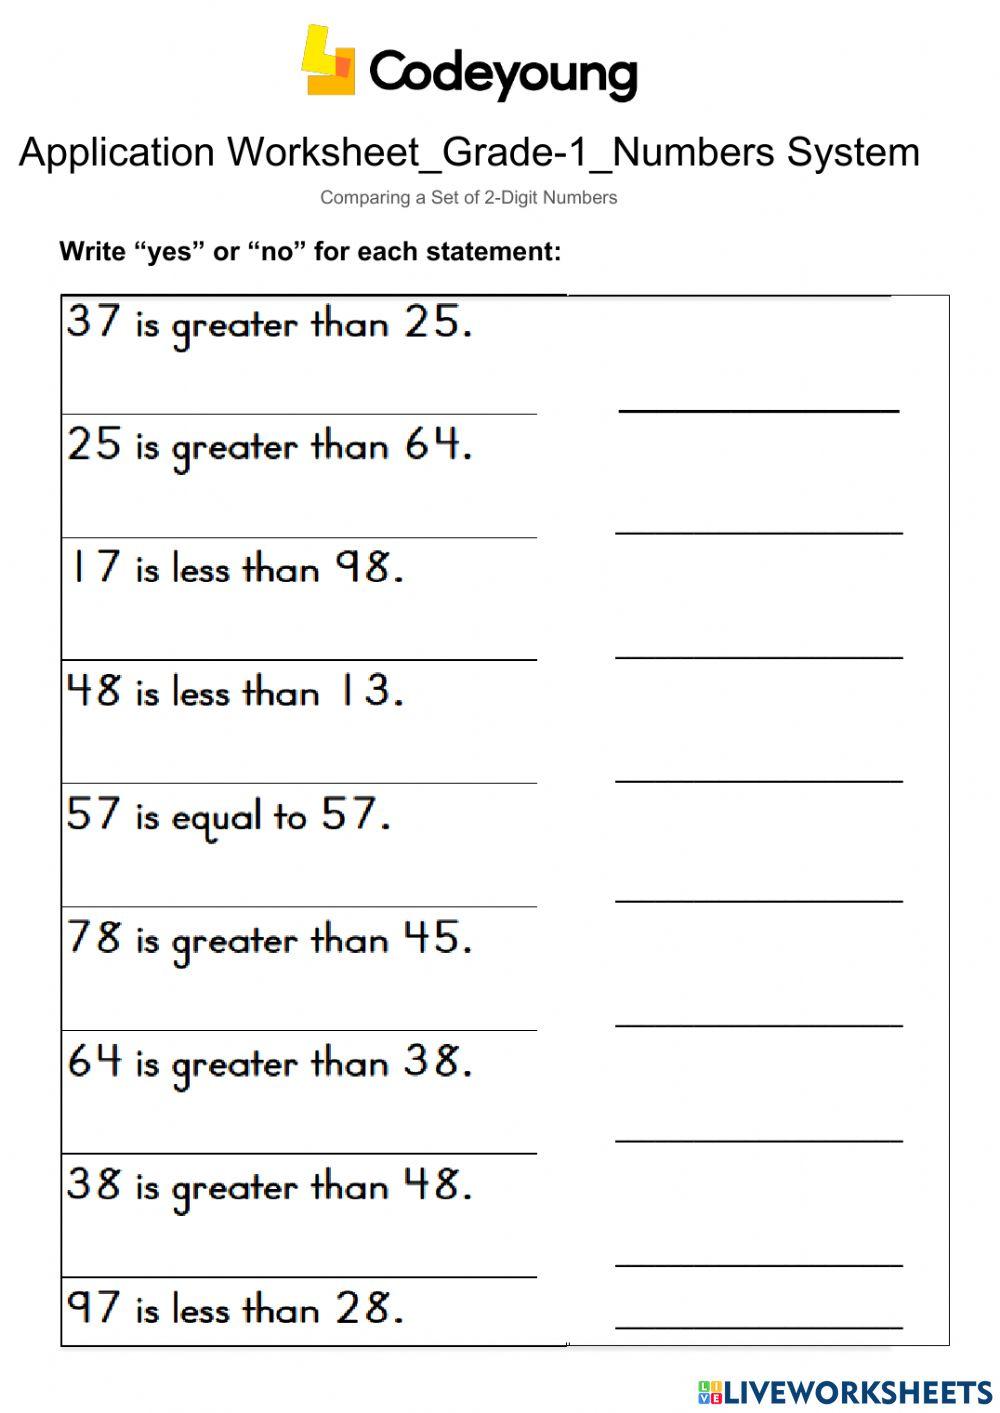 Comparing a Set of 2-Digit Numbers-Application Worksheet